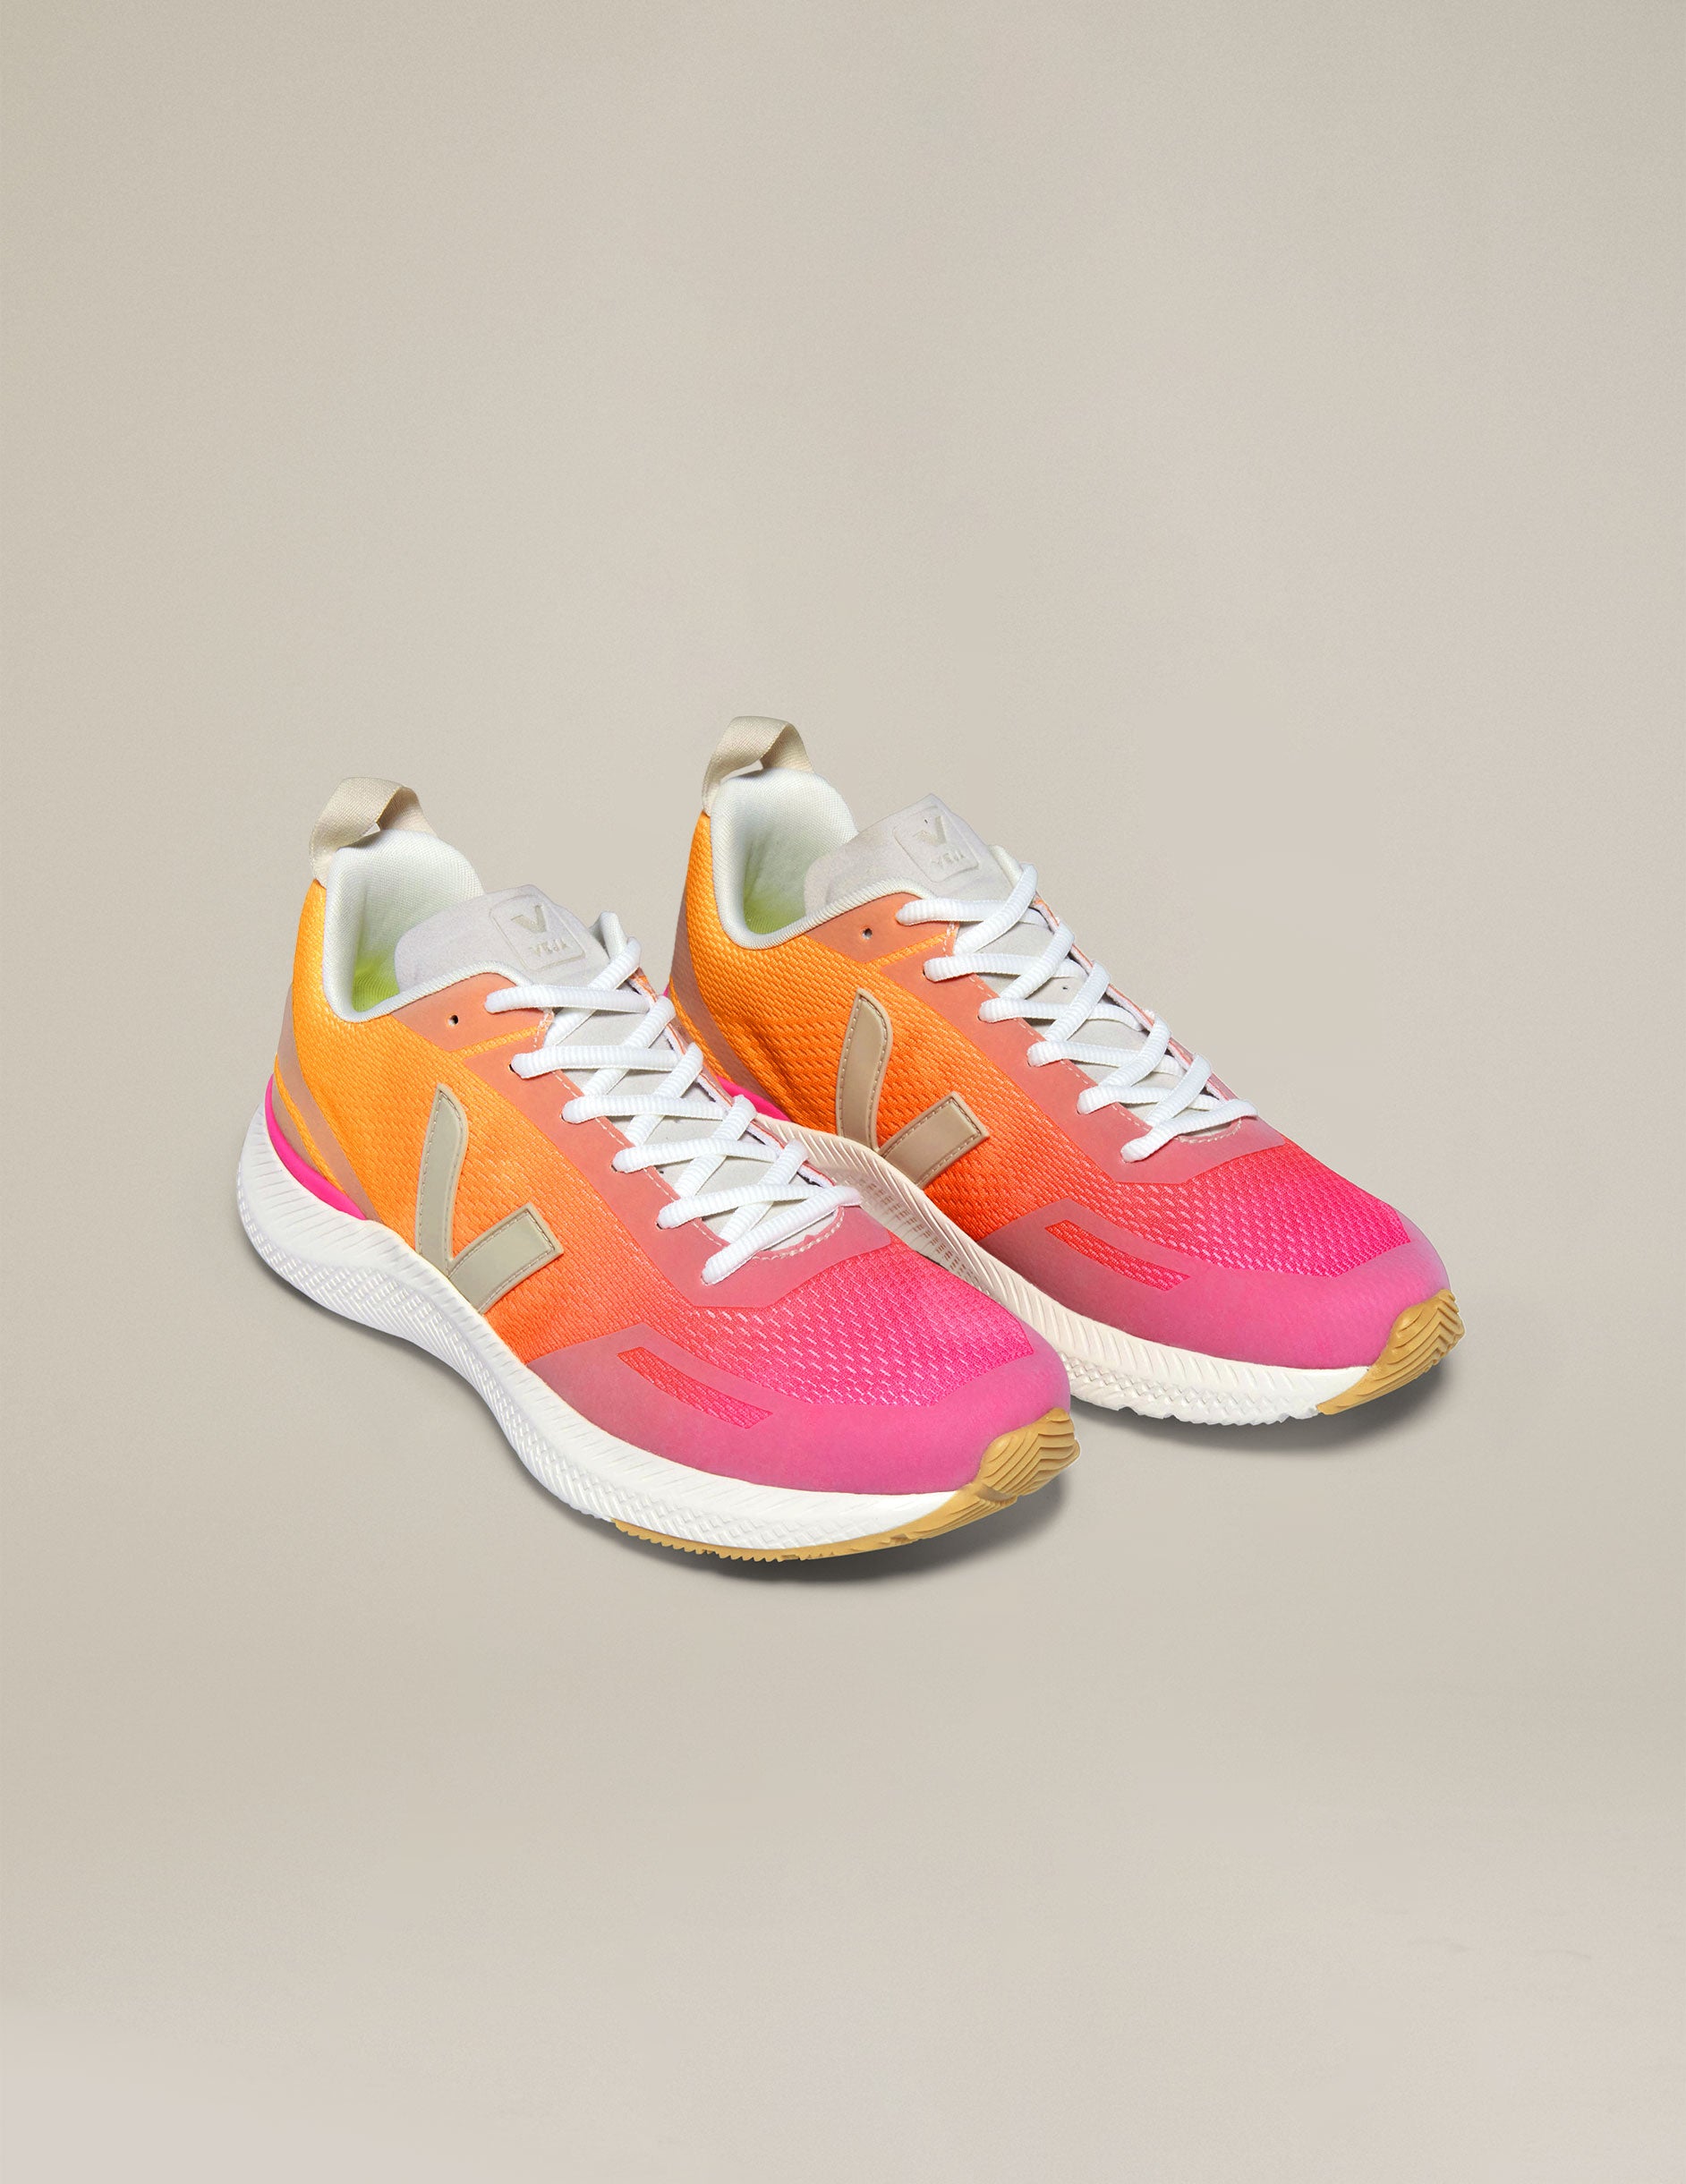 orange and pink lace up sneakers from Veja.